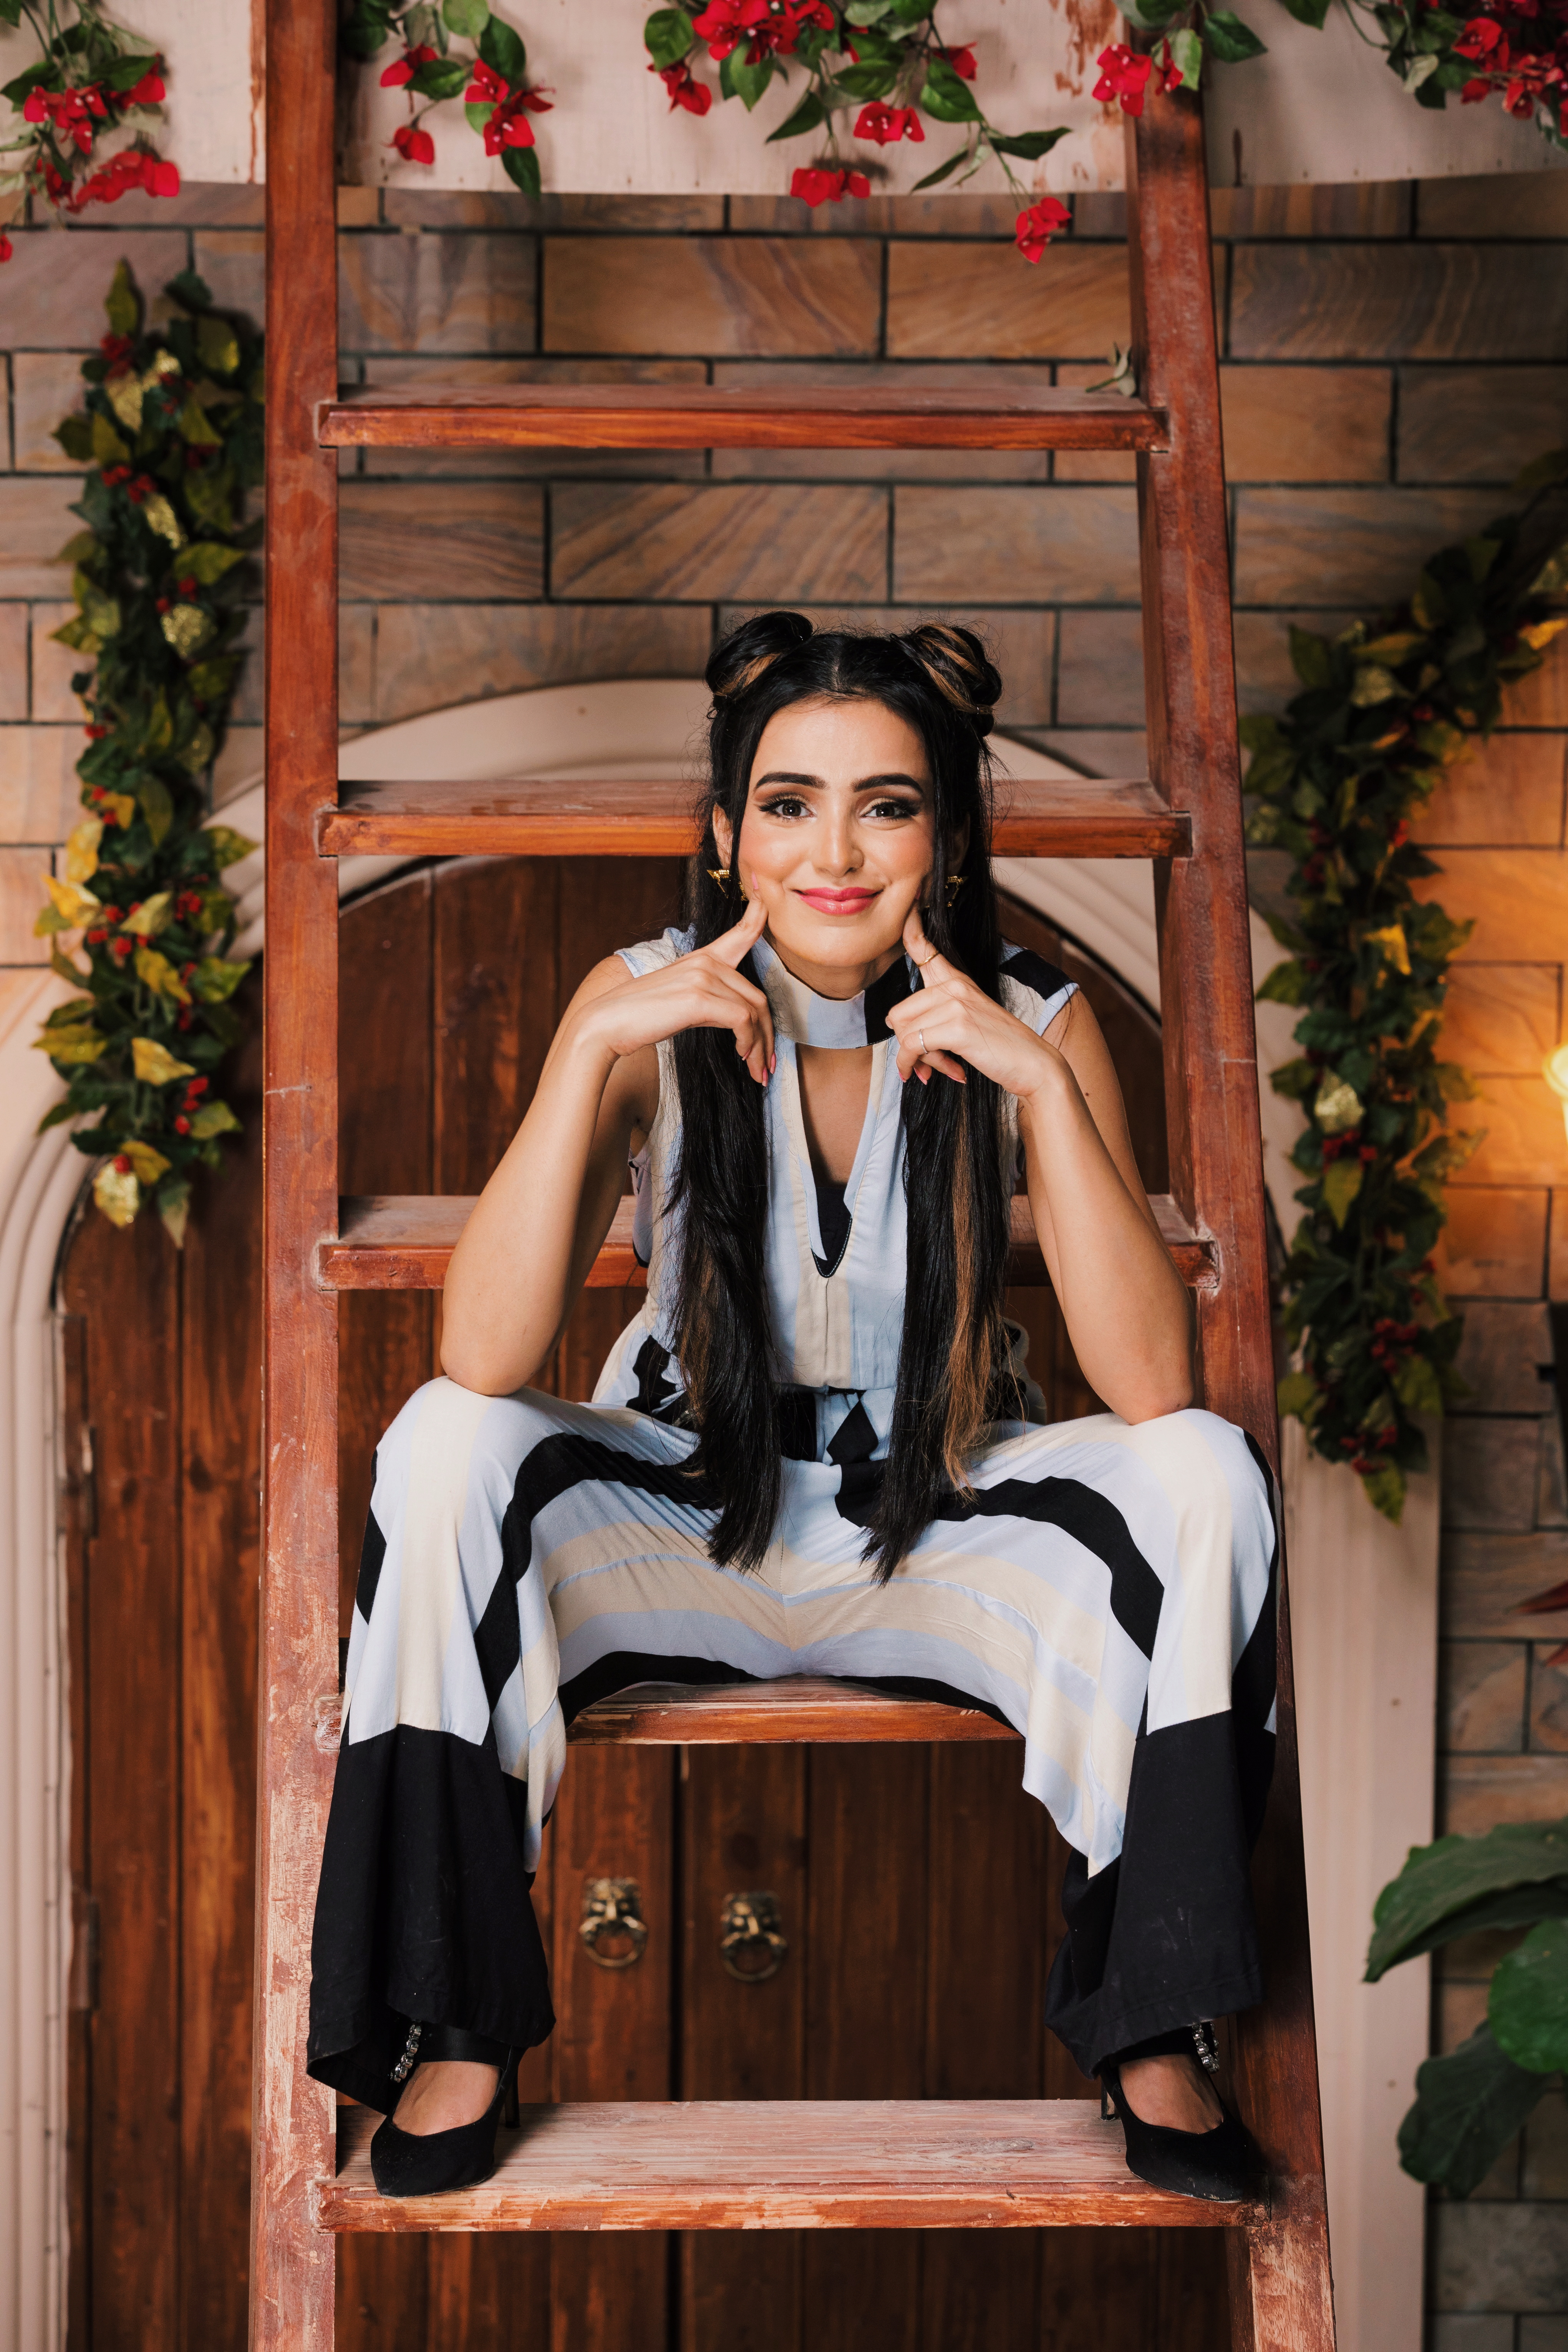 Ankitta Sharma gets candid about the role in Ishq Aaj Kal which is Spin-off from Ishq Subhanallah